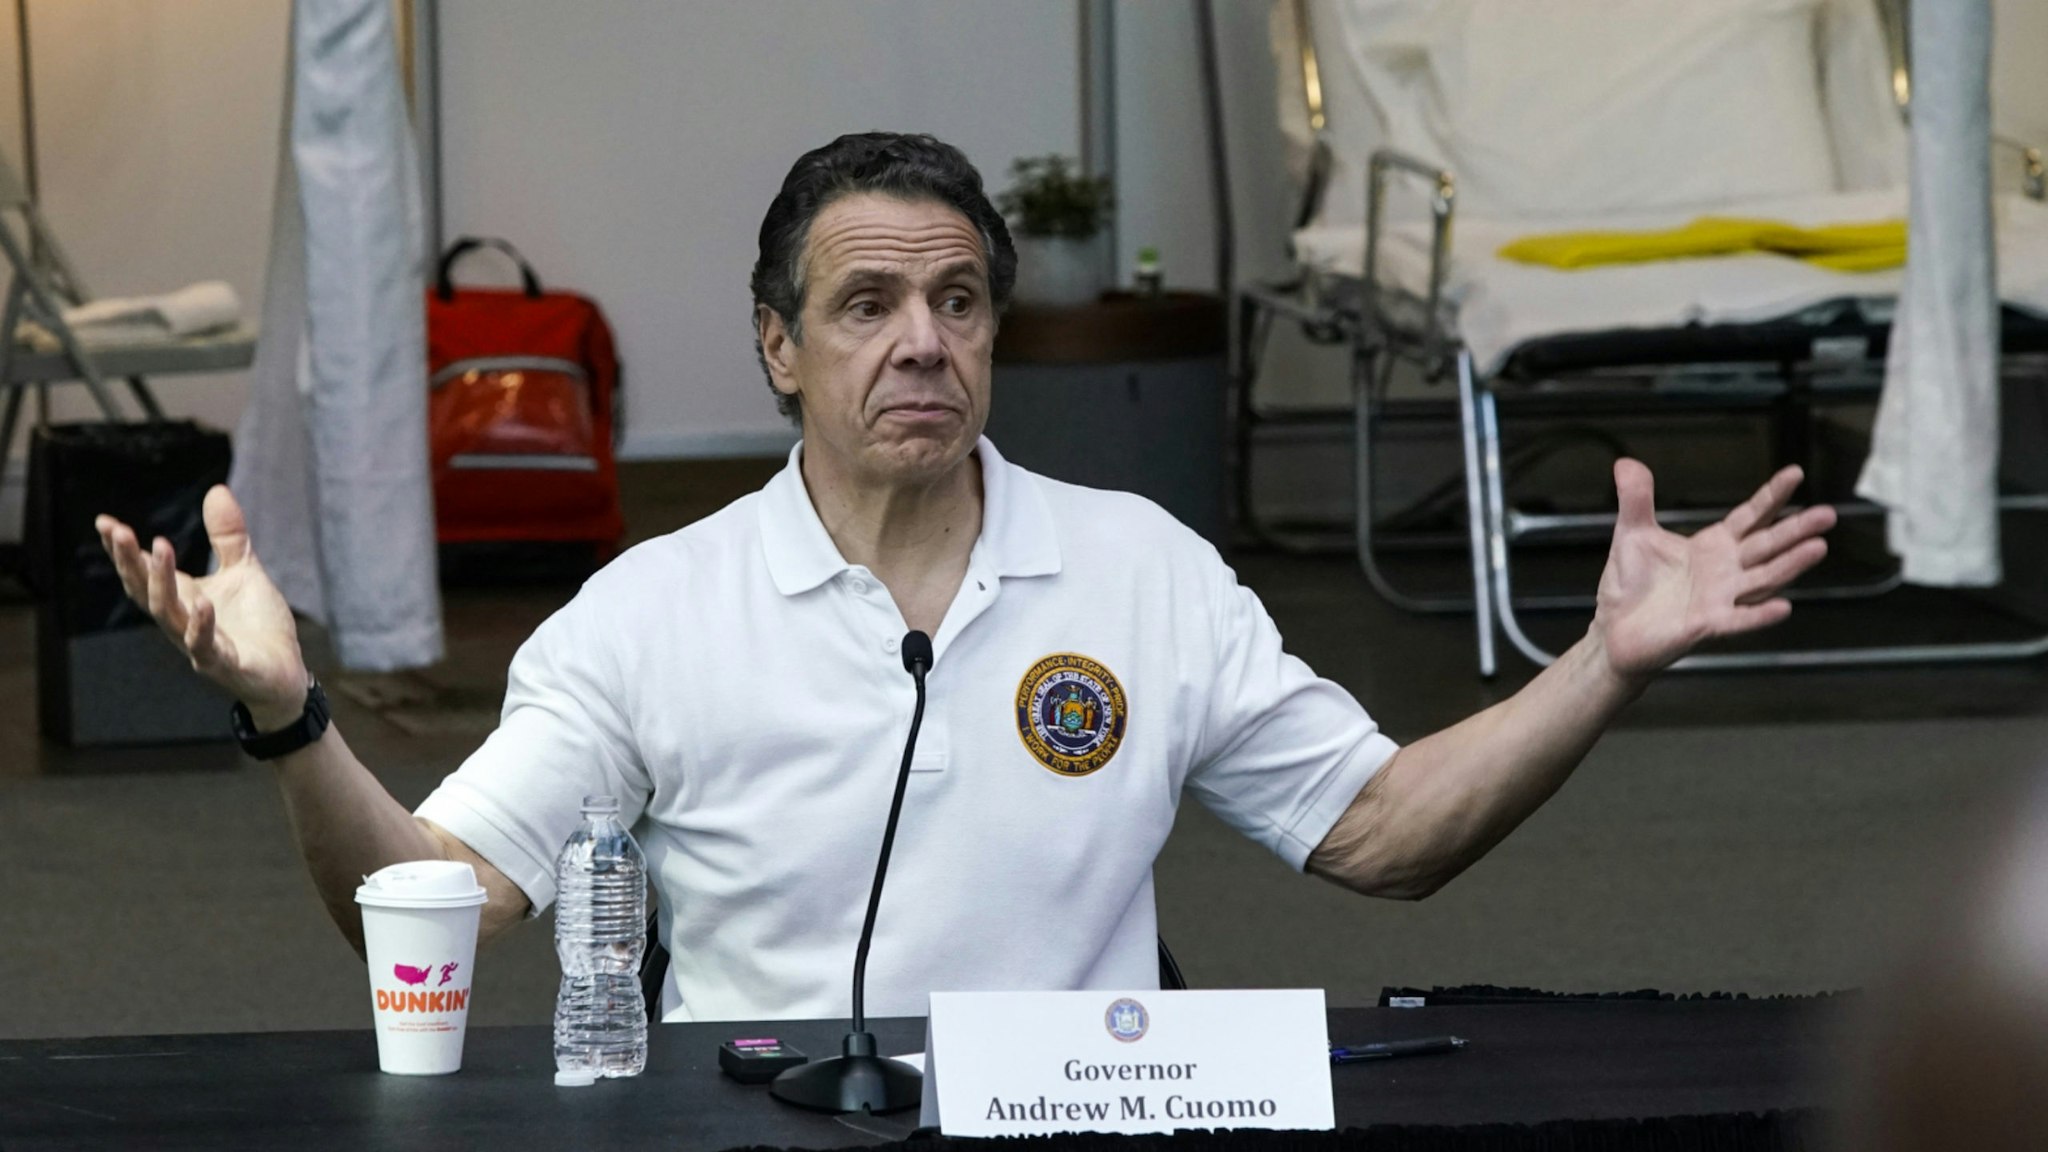 New York Gov Andrew Cuomo gives a daily coronavirus press conference in front of media and National Guard members at the Jacob K. Javits Convention Center, which is being turned into a hospital to help fight coronavirus cases on March 27, 2020 in New York City.